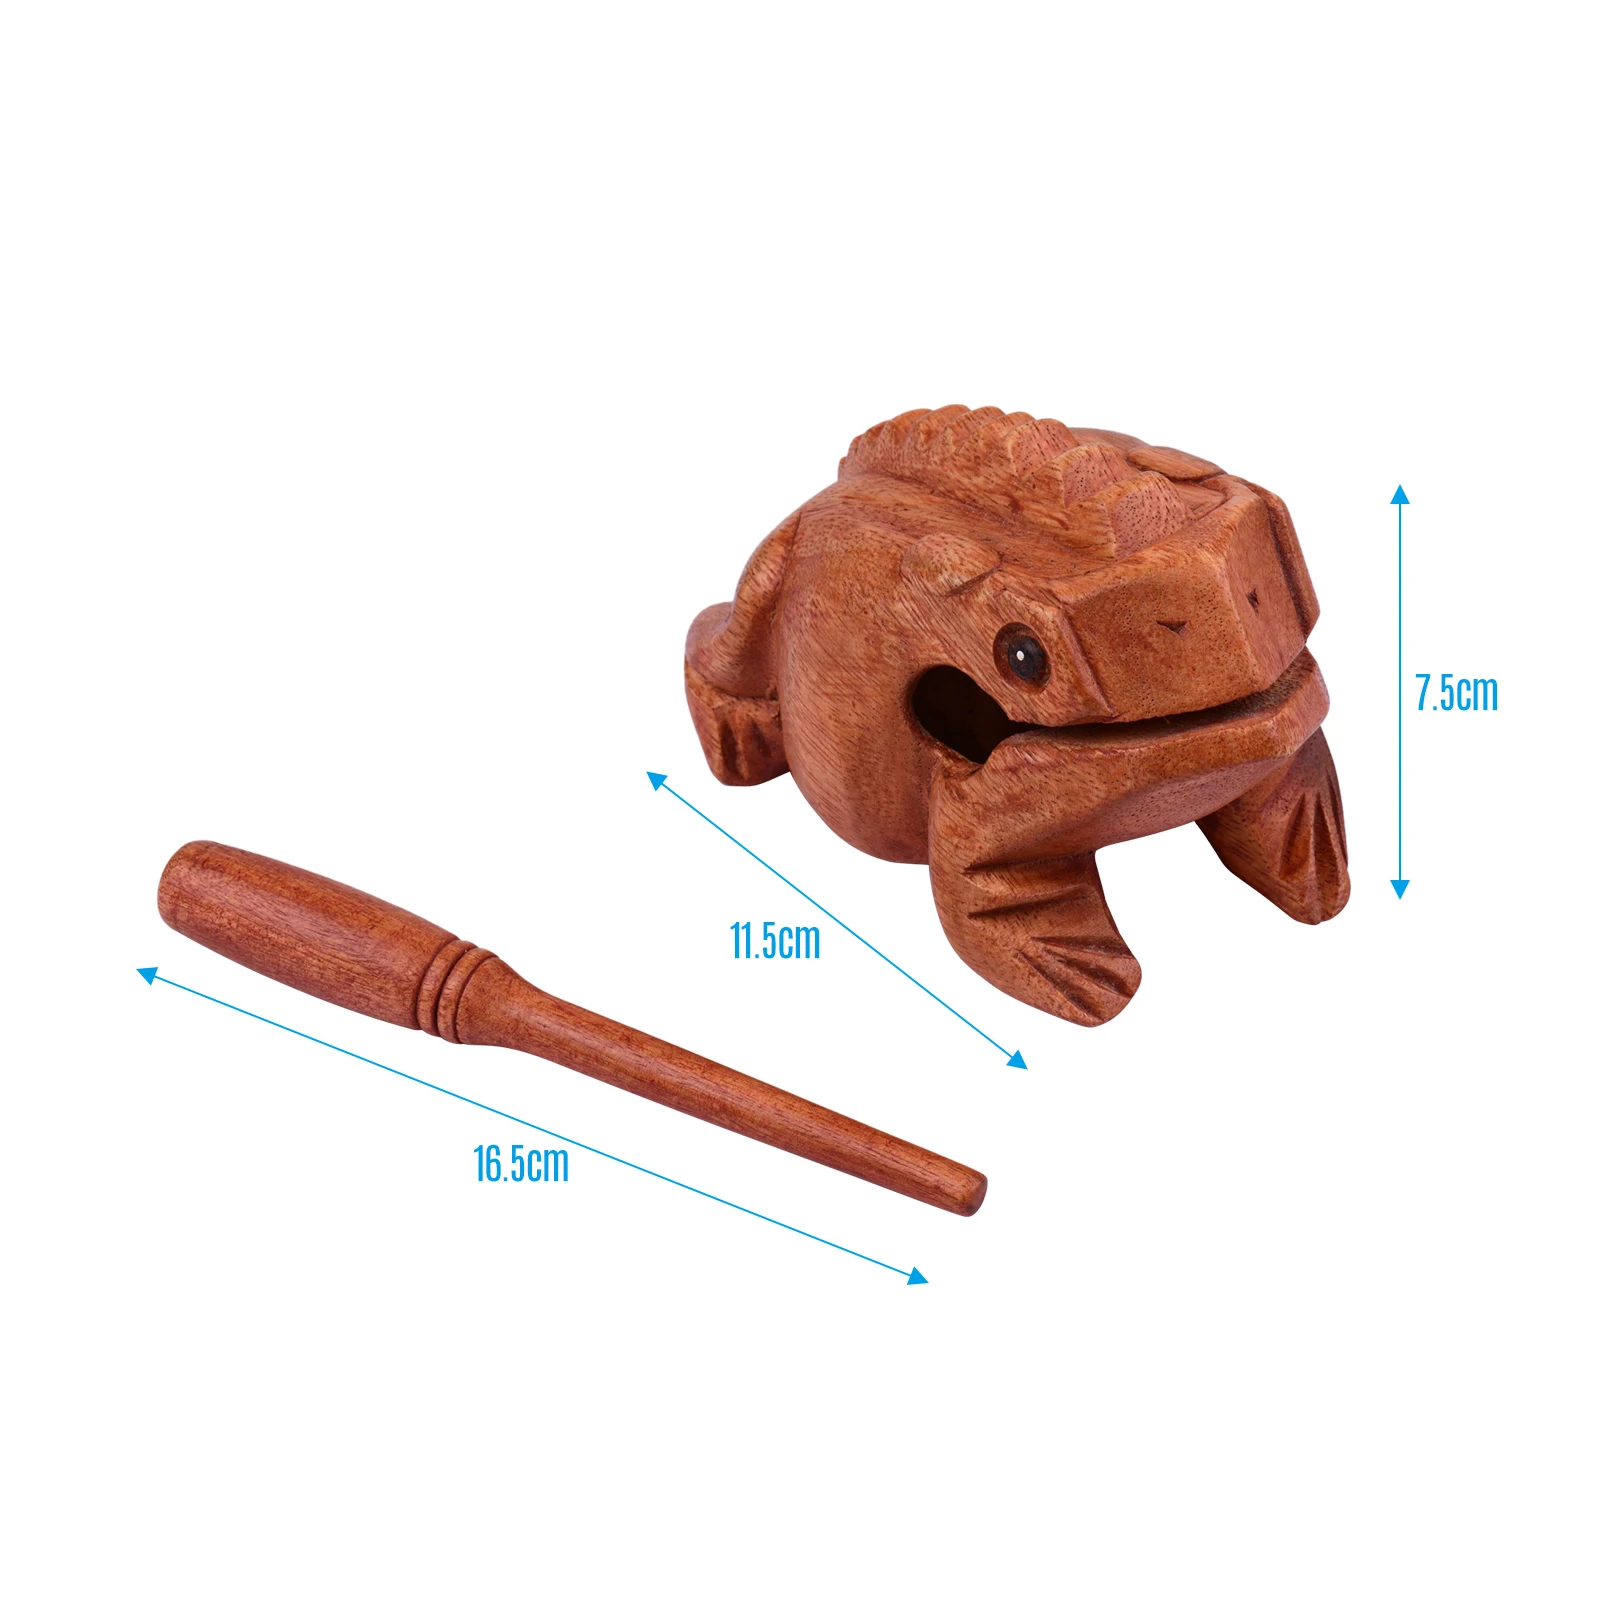 SOURBAN Wood Frog Guiro Rasp Stress Relief Toy Kid Musical Toy 